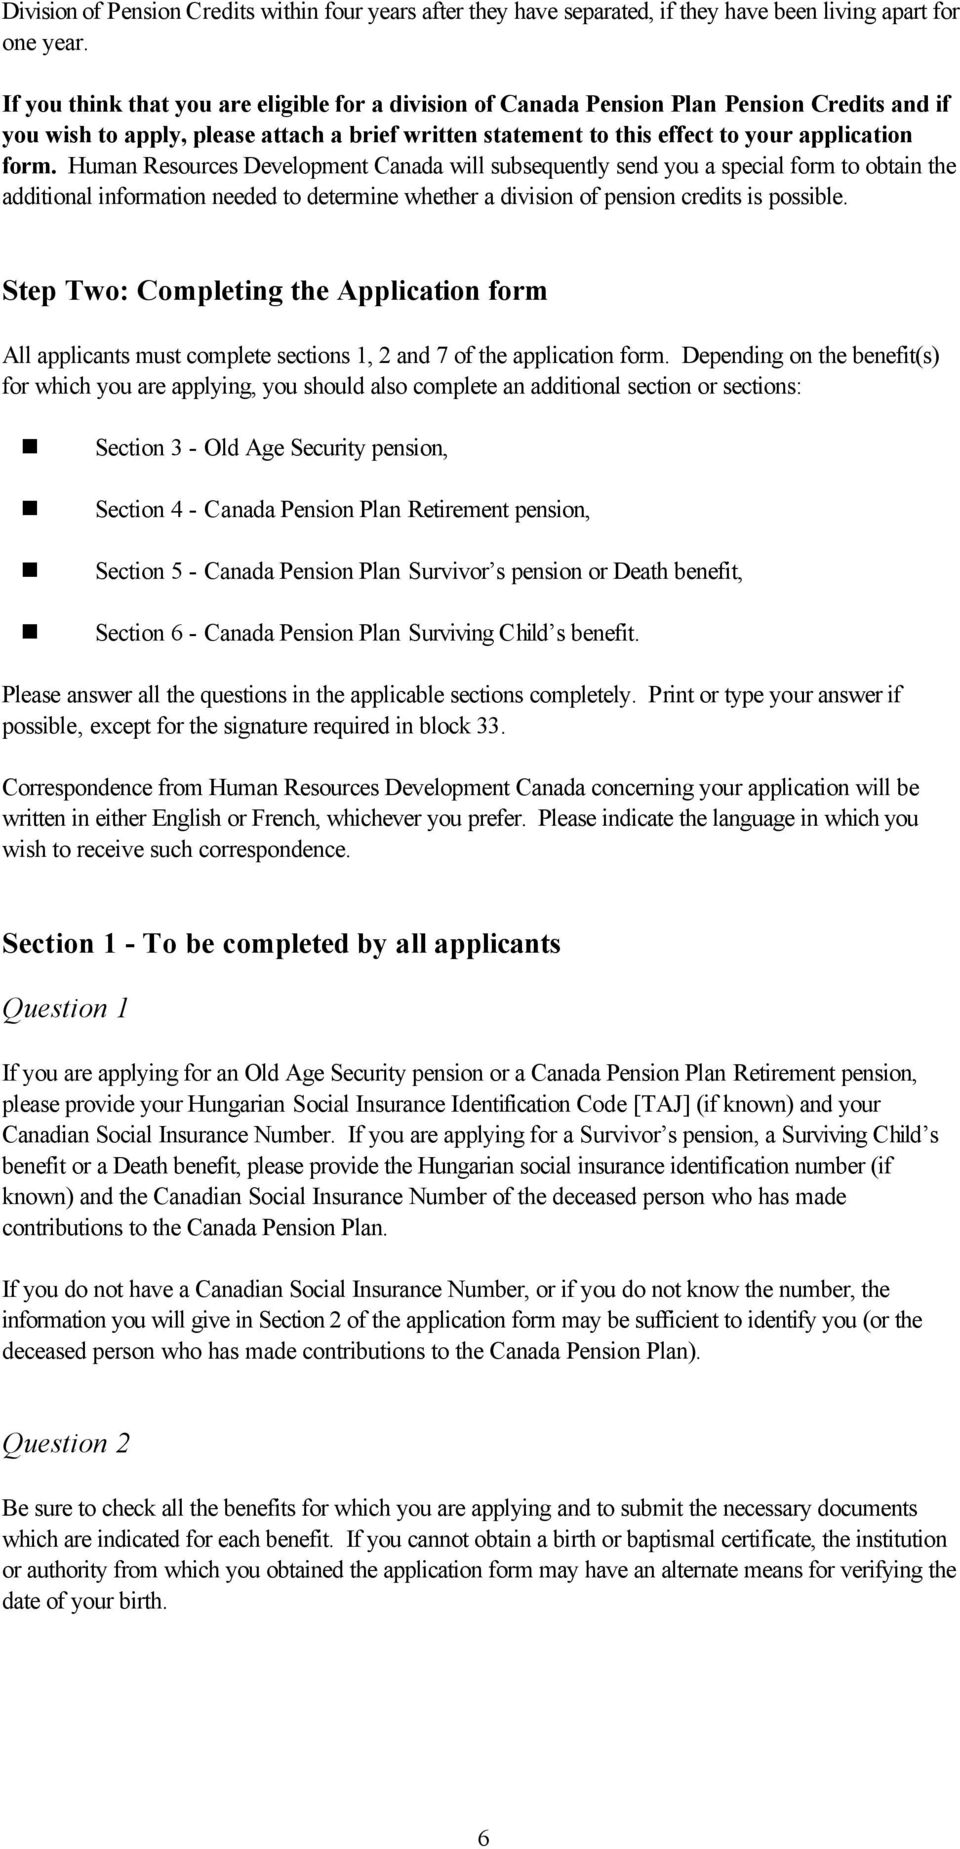 Human Resources Development Canada will subsequently send you a special form to obtain the additional information needed to determine whether a division of pension credits is possible.